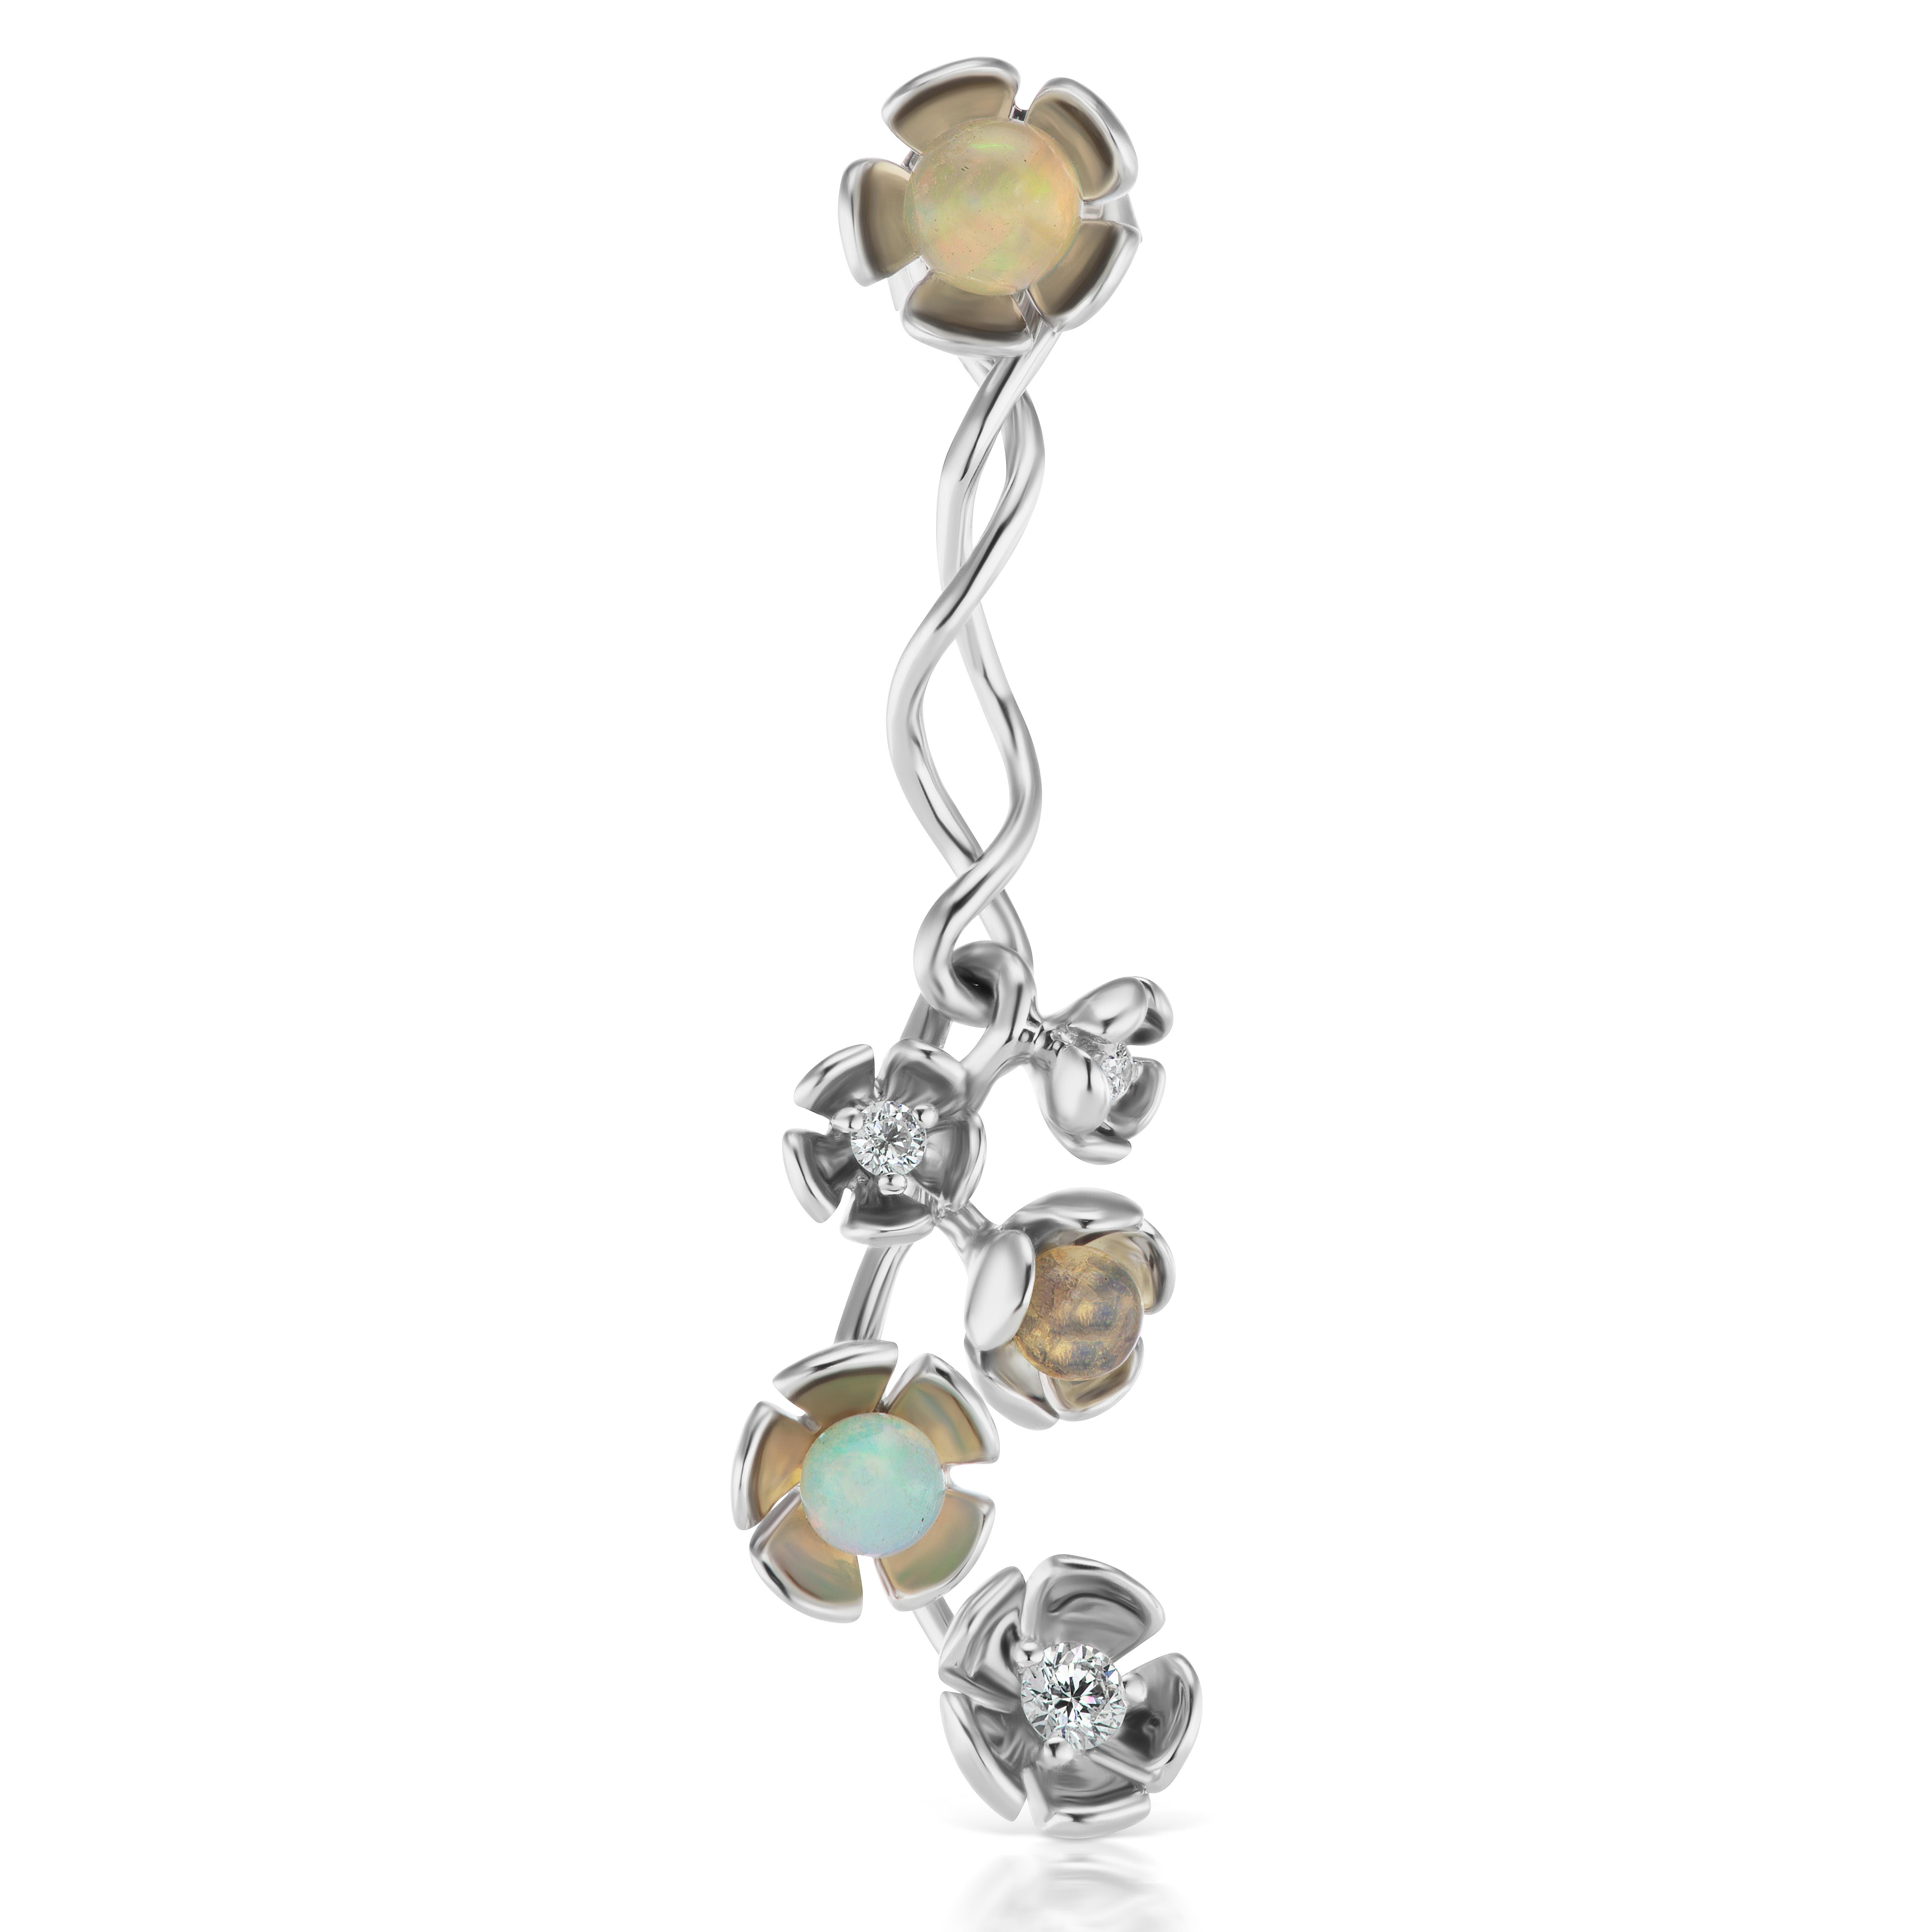 18K White Gold Vine Earrings with Diamond and Opal Bead Flowers
Diamond accents 0.20 ct tw.
2